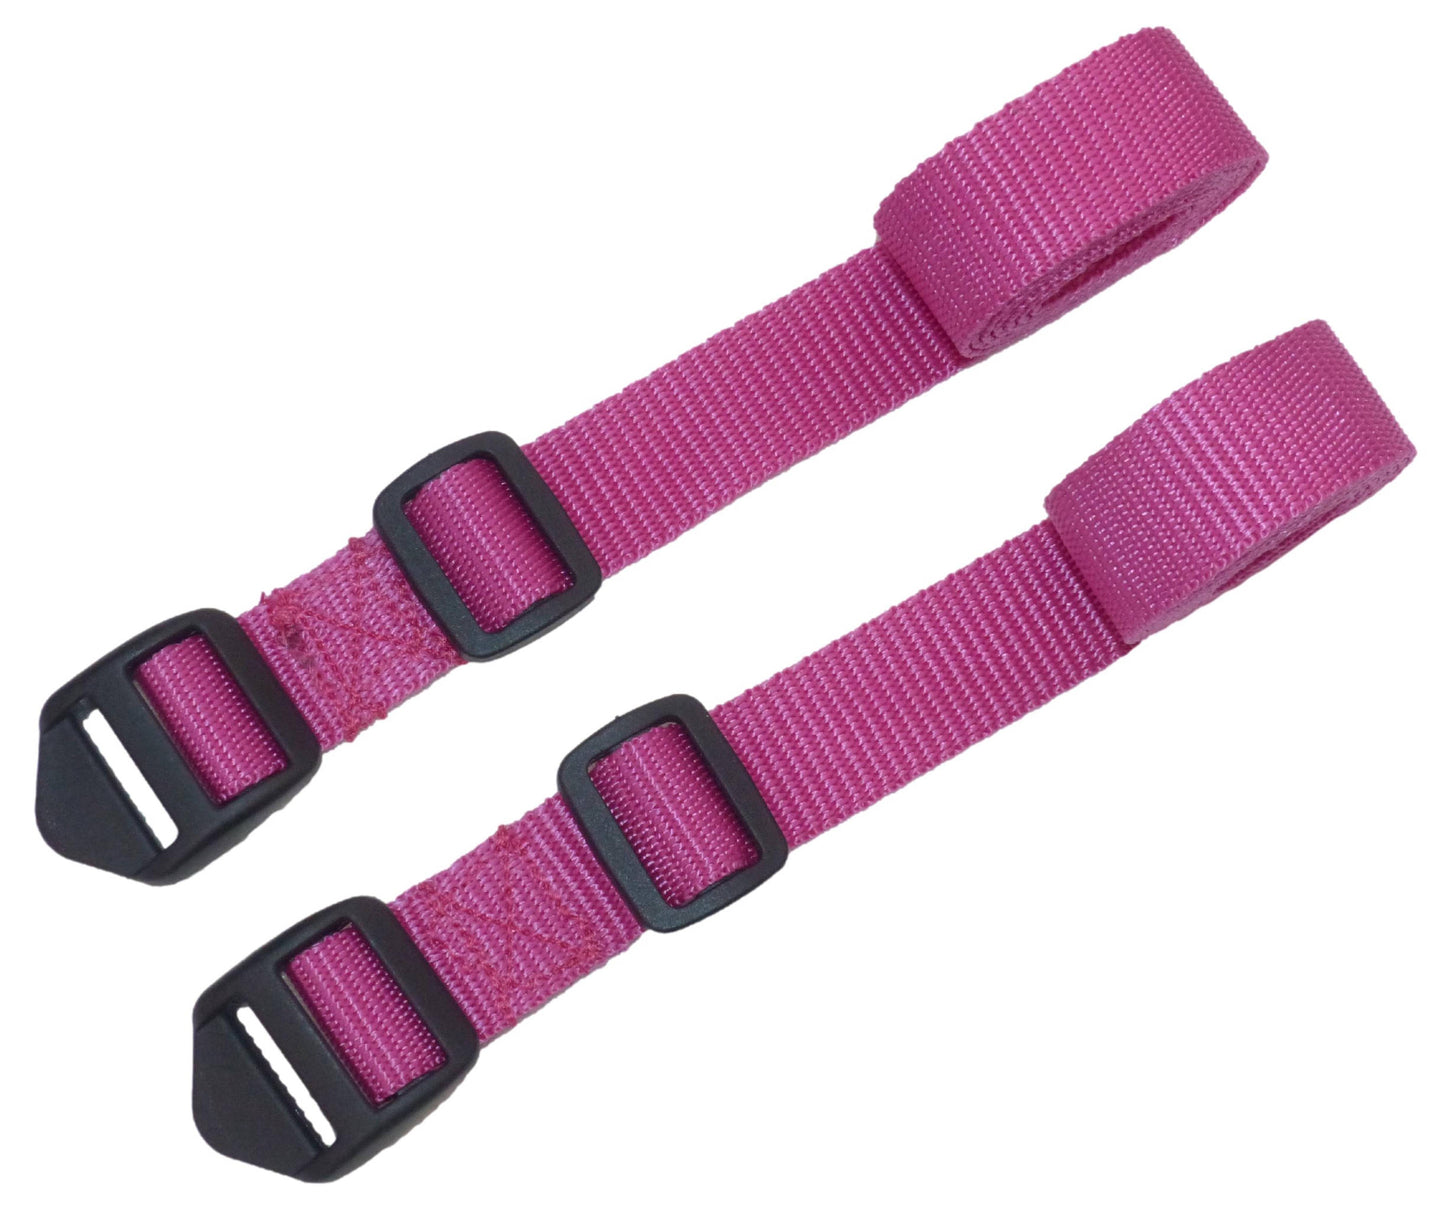 The Benristraps 25mm Camping Straps, 150cm (pair) in pink